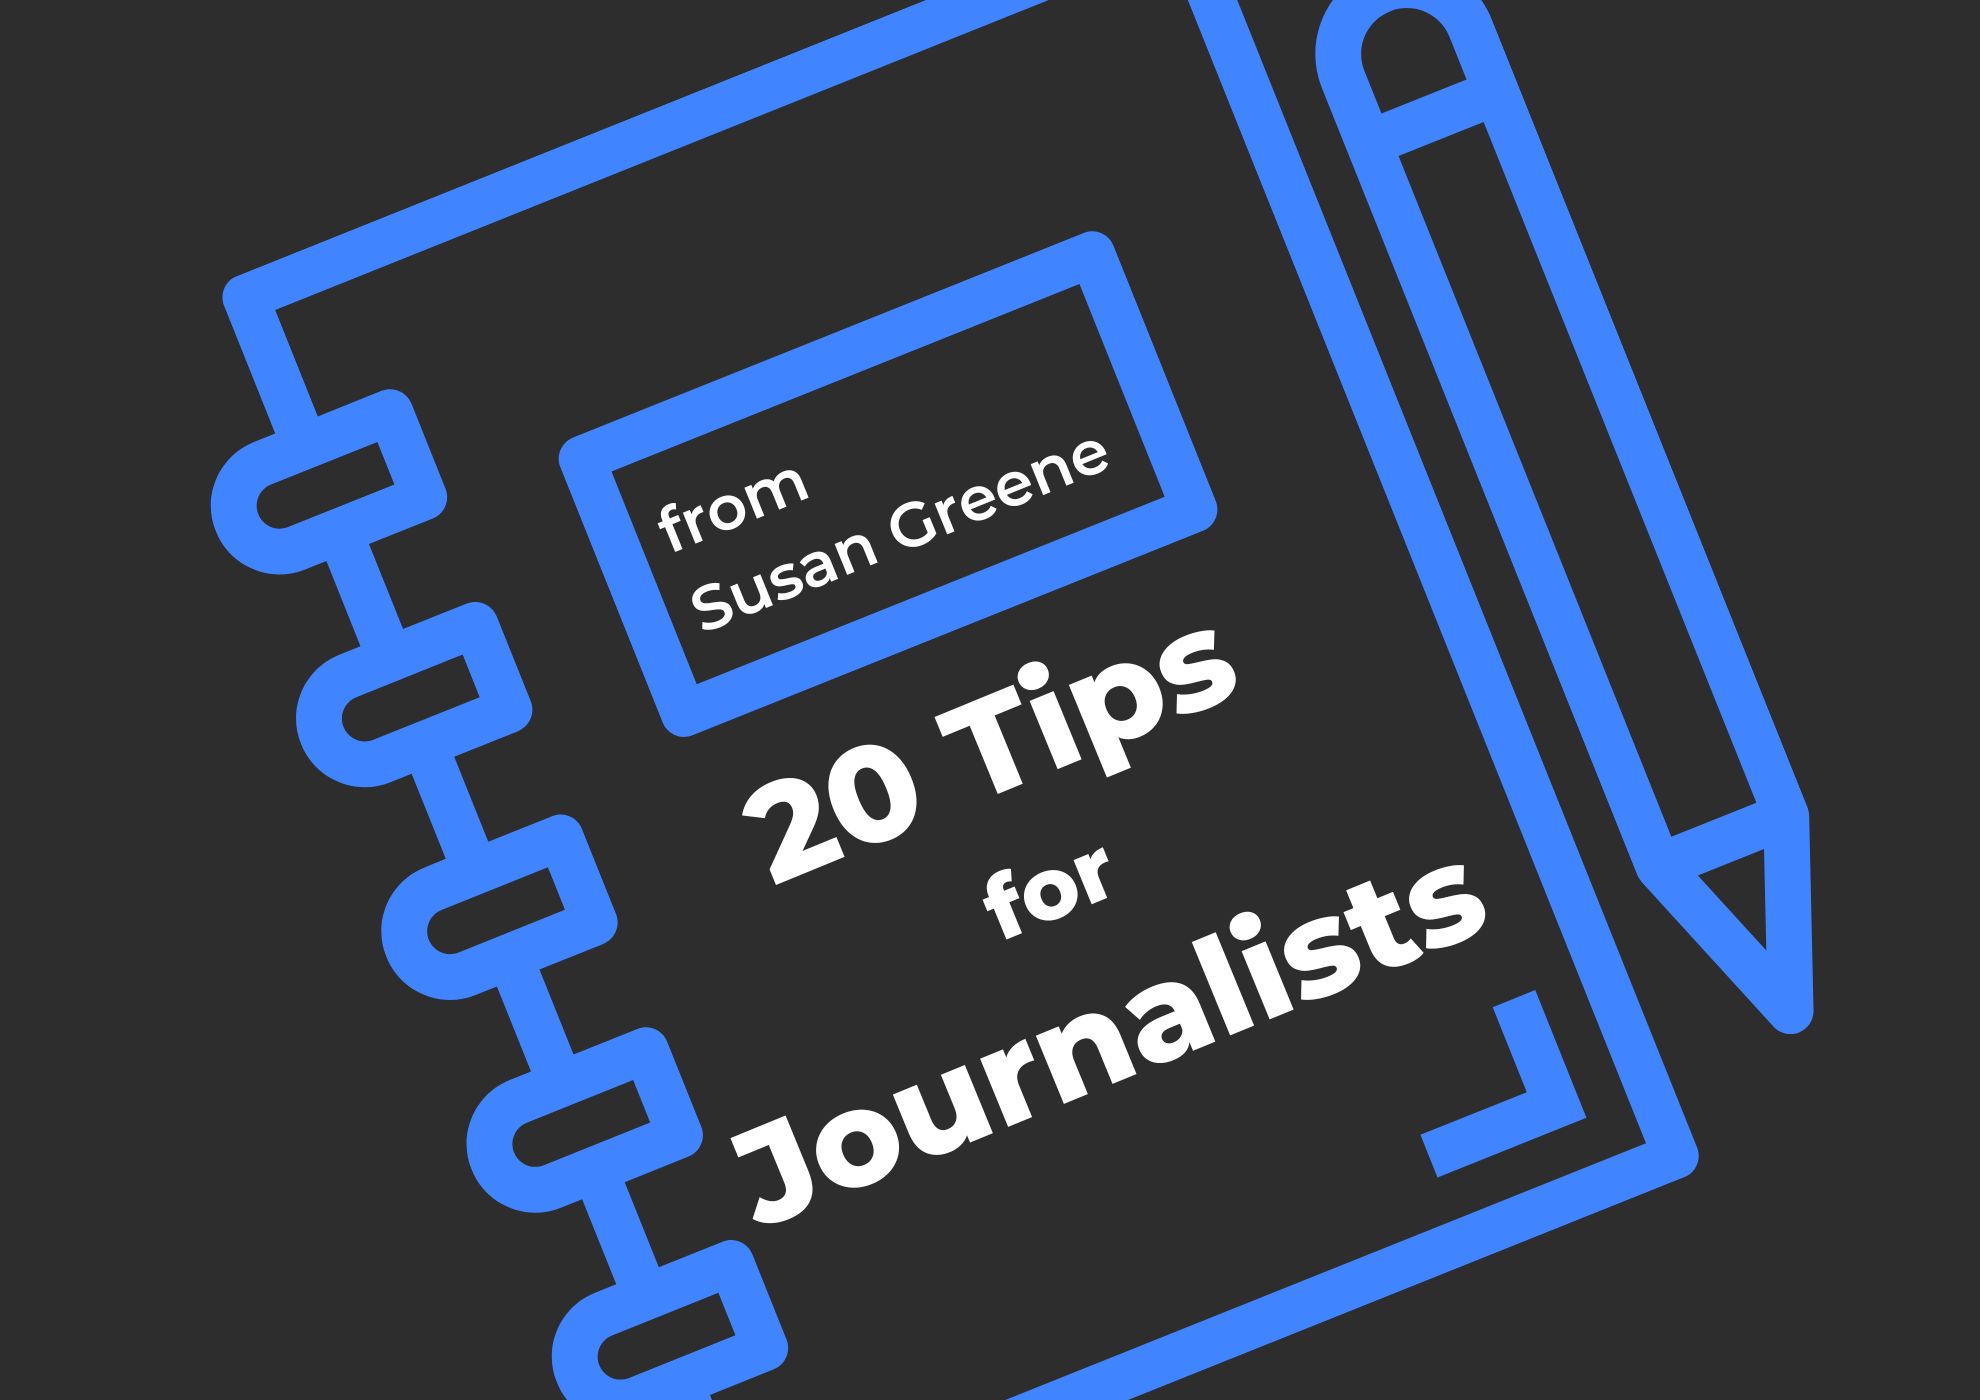 20 tips for journalists